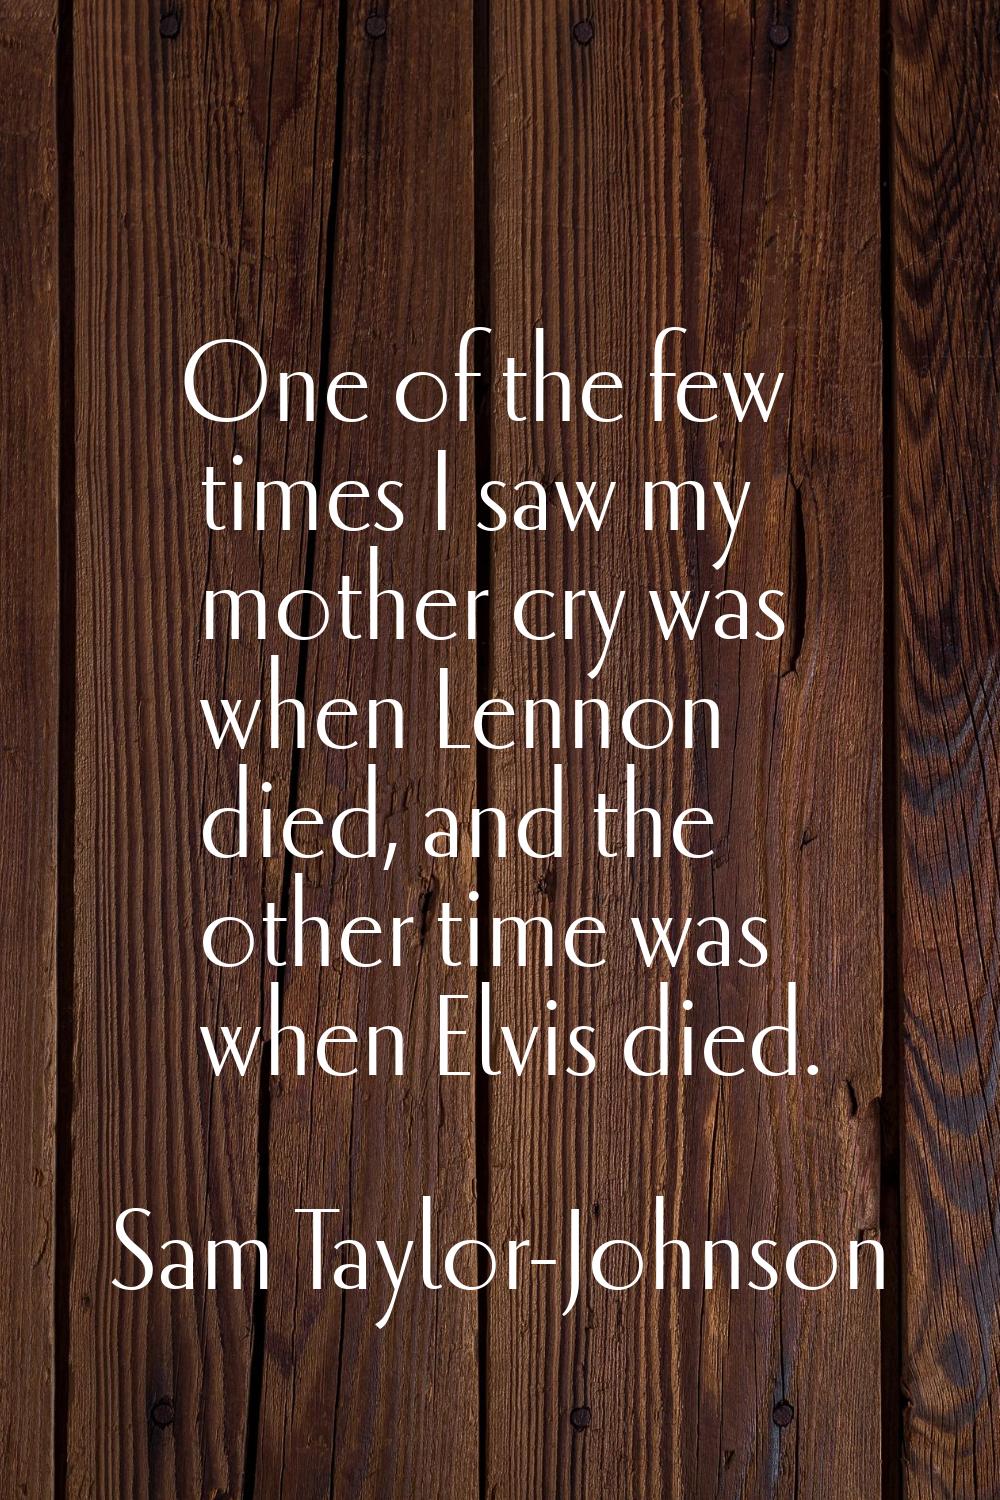 One of the few times I saw my mother cry was when Lennon died, and the other time was when Elvis di